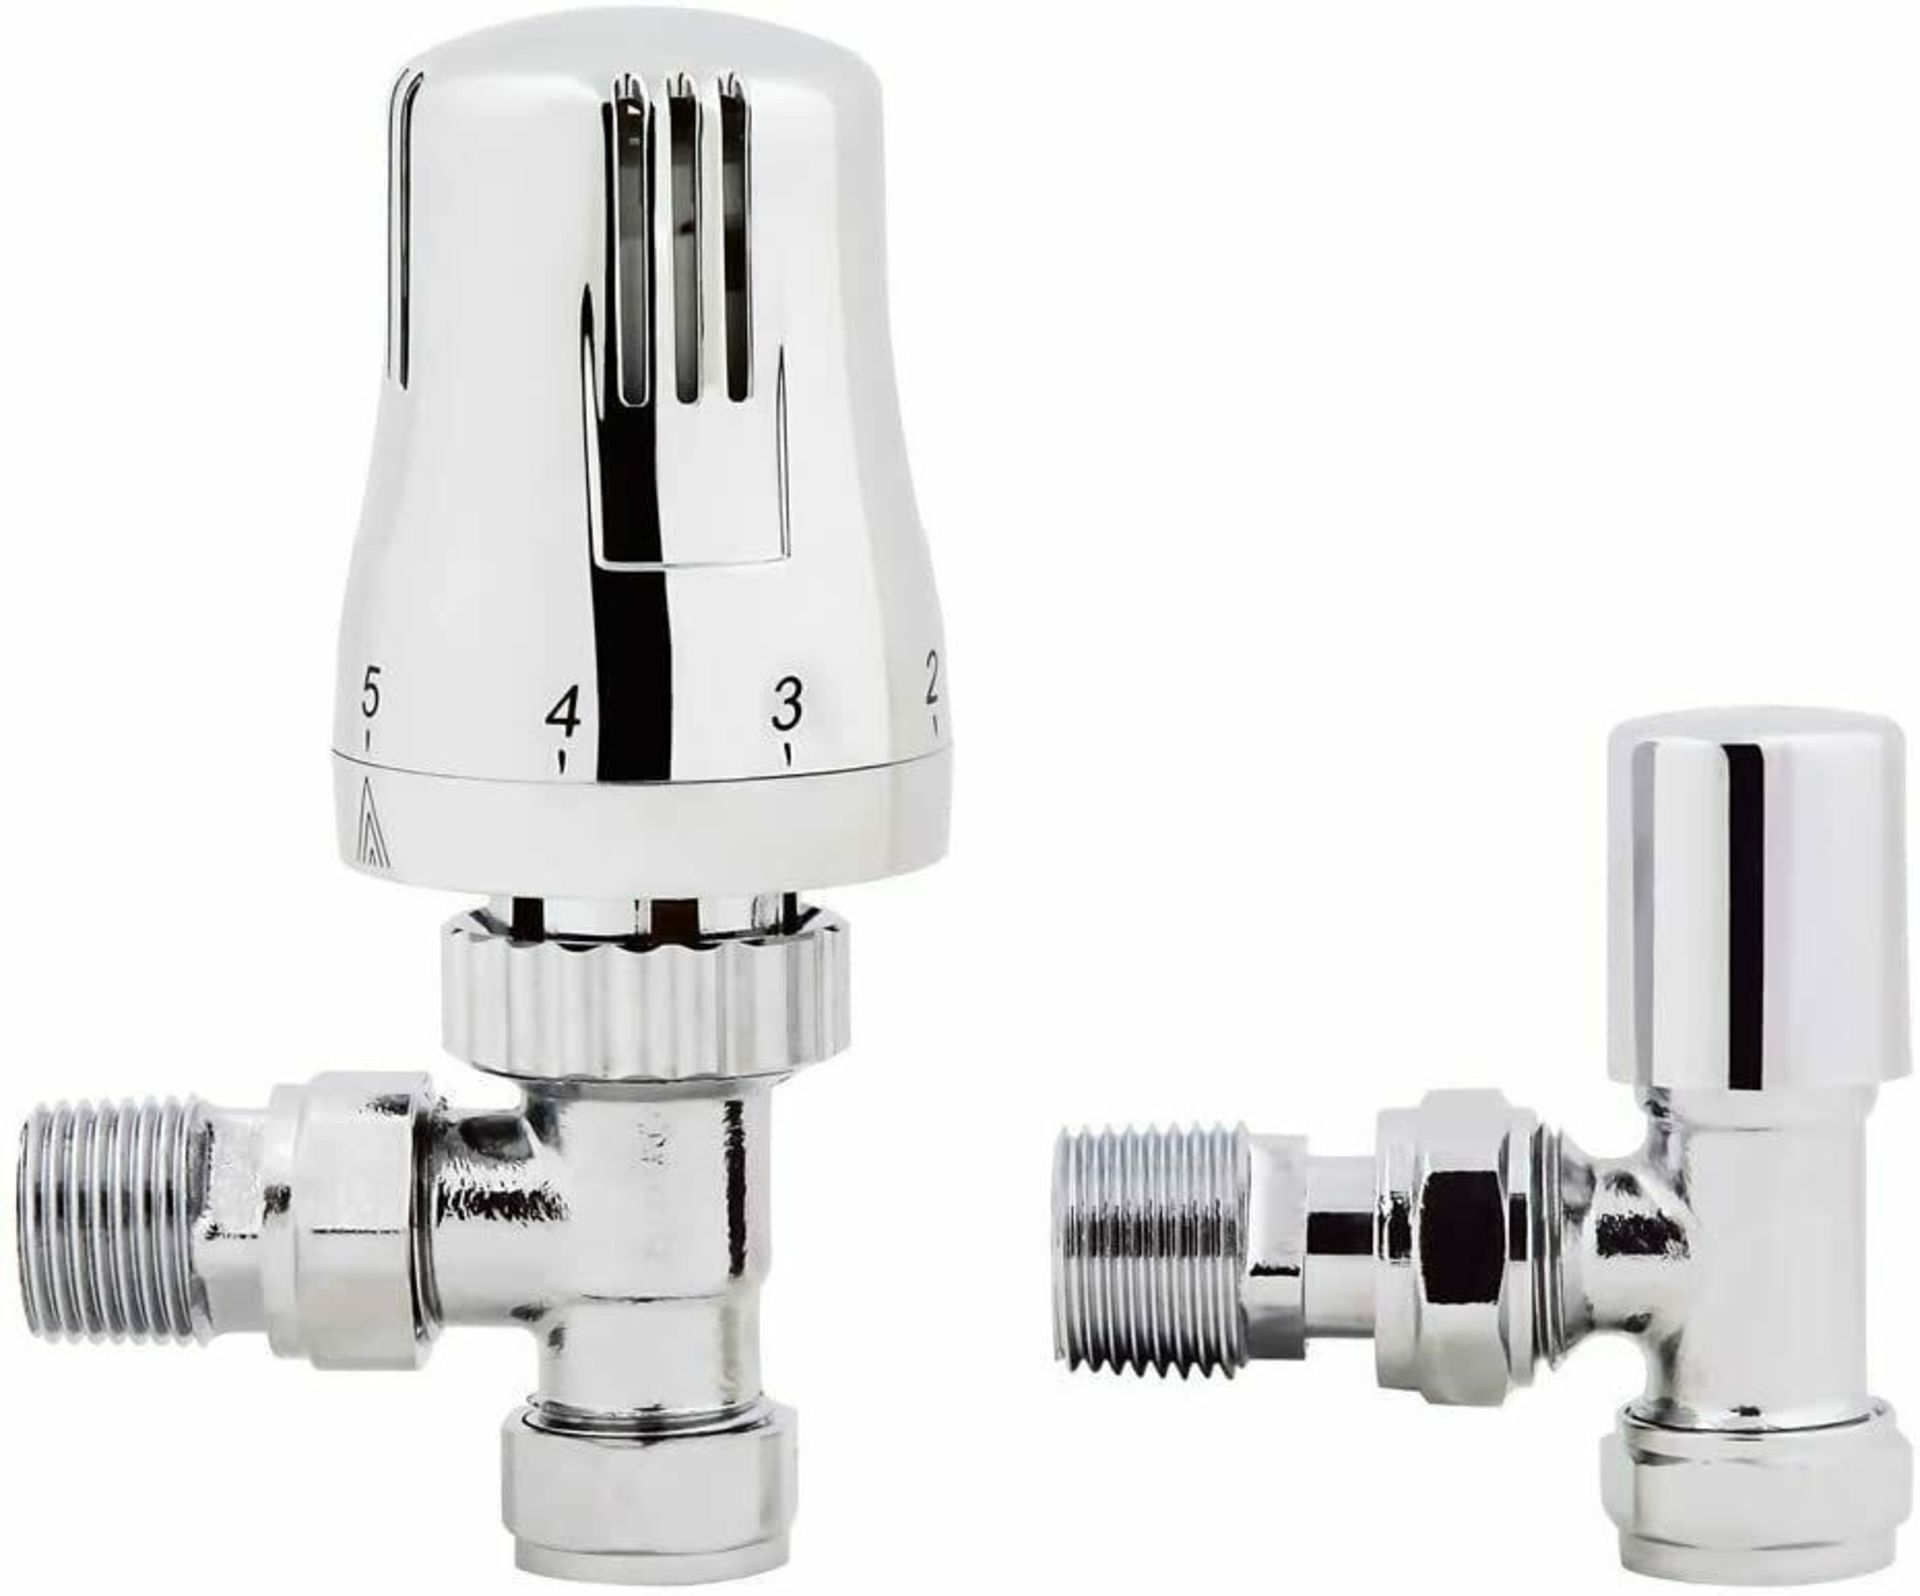 New & Boxed Chrome Thermostatic Control Angled Designer Radiator Valves Pair 15mm - New. RRP £...